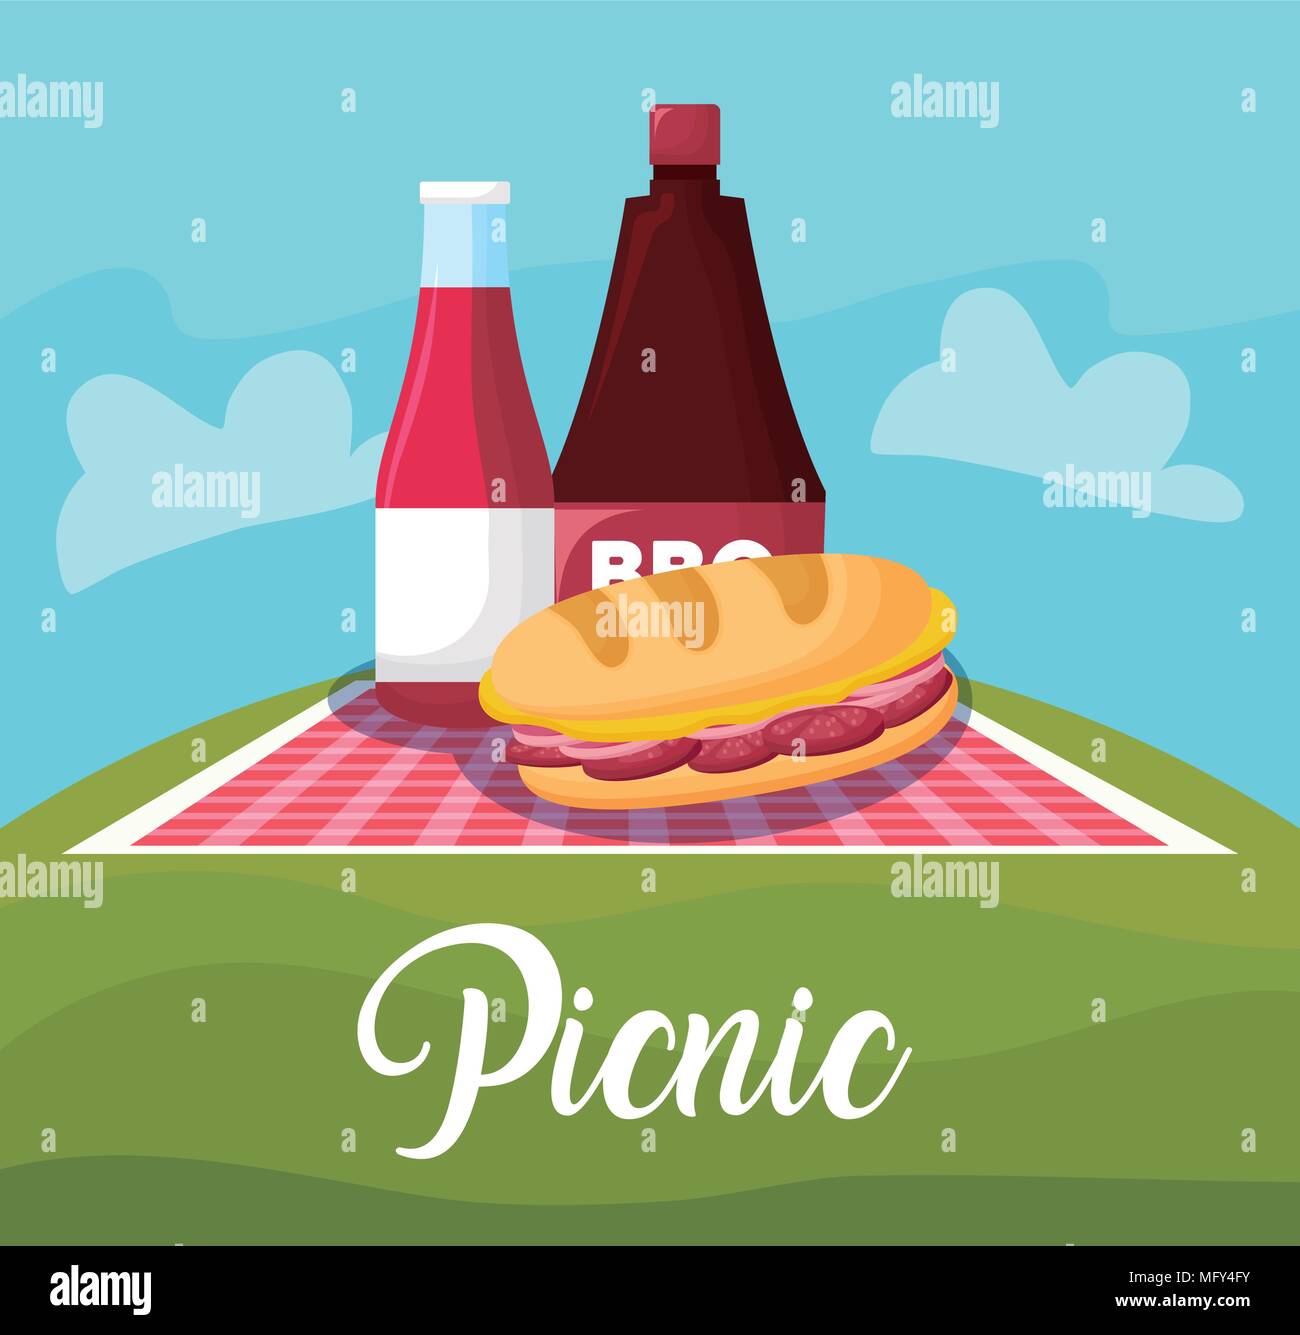 picnic landscape concept with sandwich and sauce bottles, colorful design. vector illustration Stock Vector